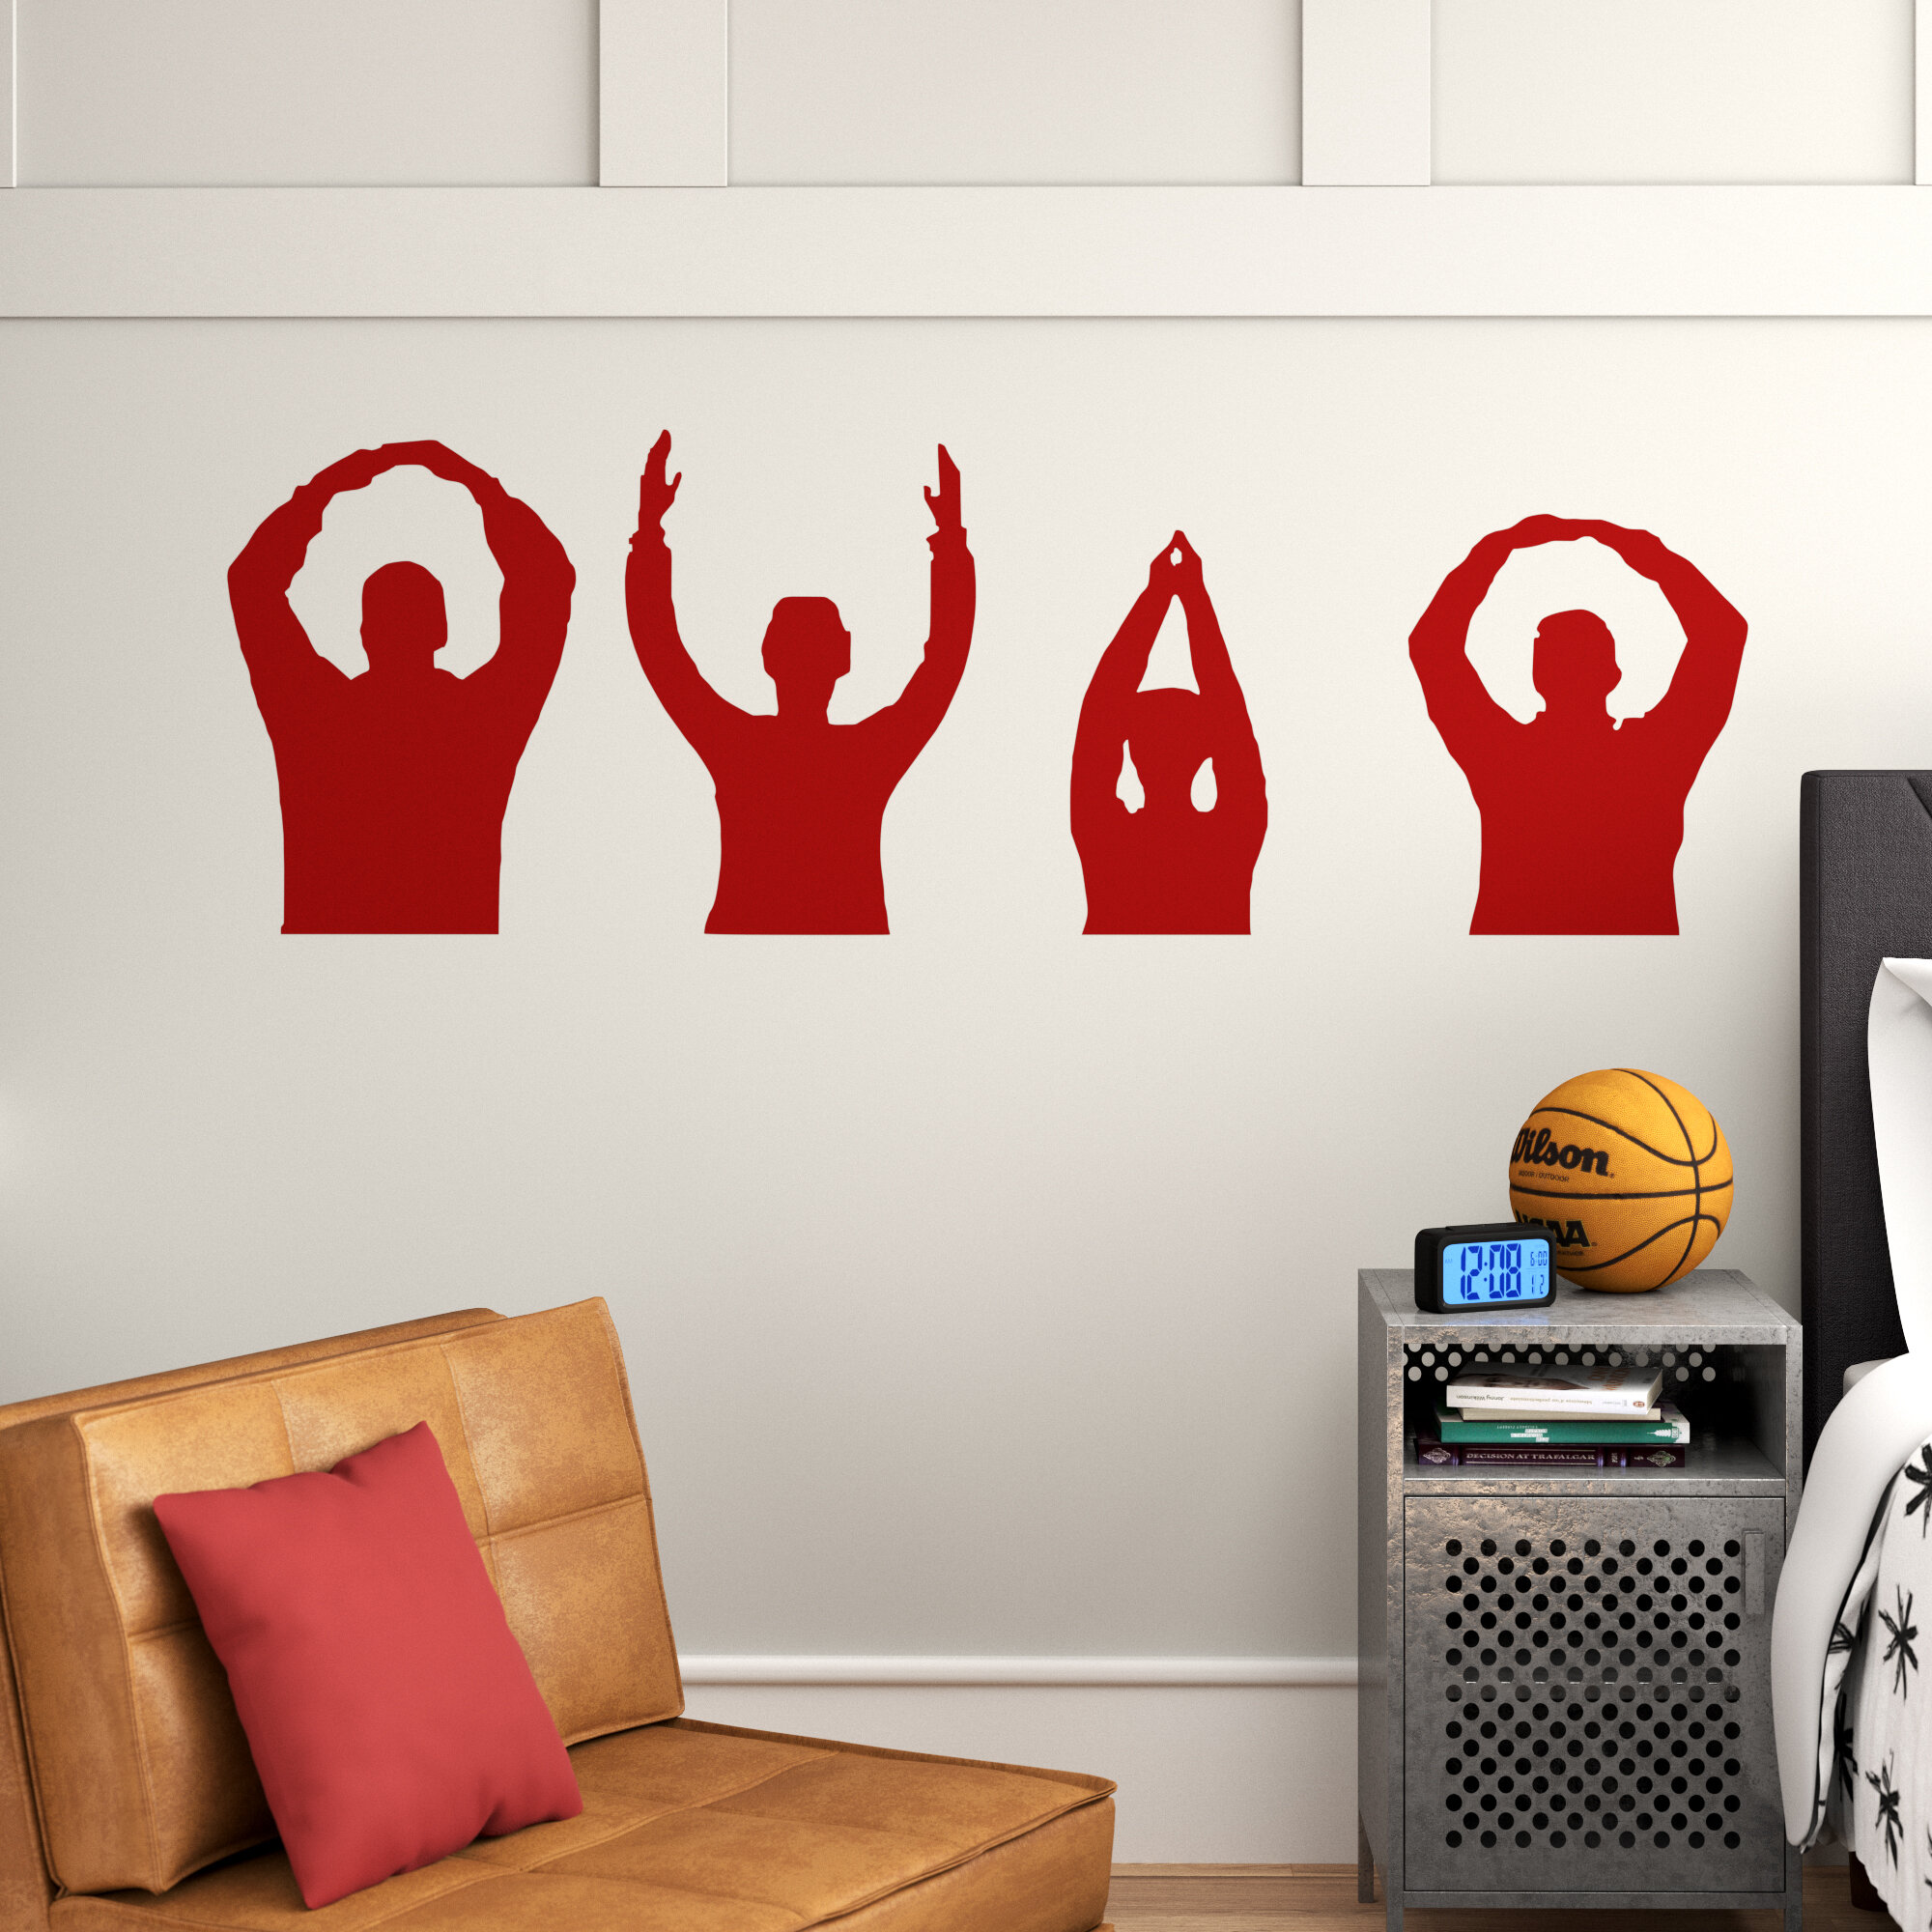 Trule Entertainment Non-Wall Damaging Wall Decal & Reviews